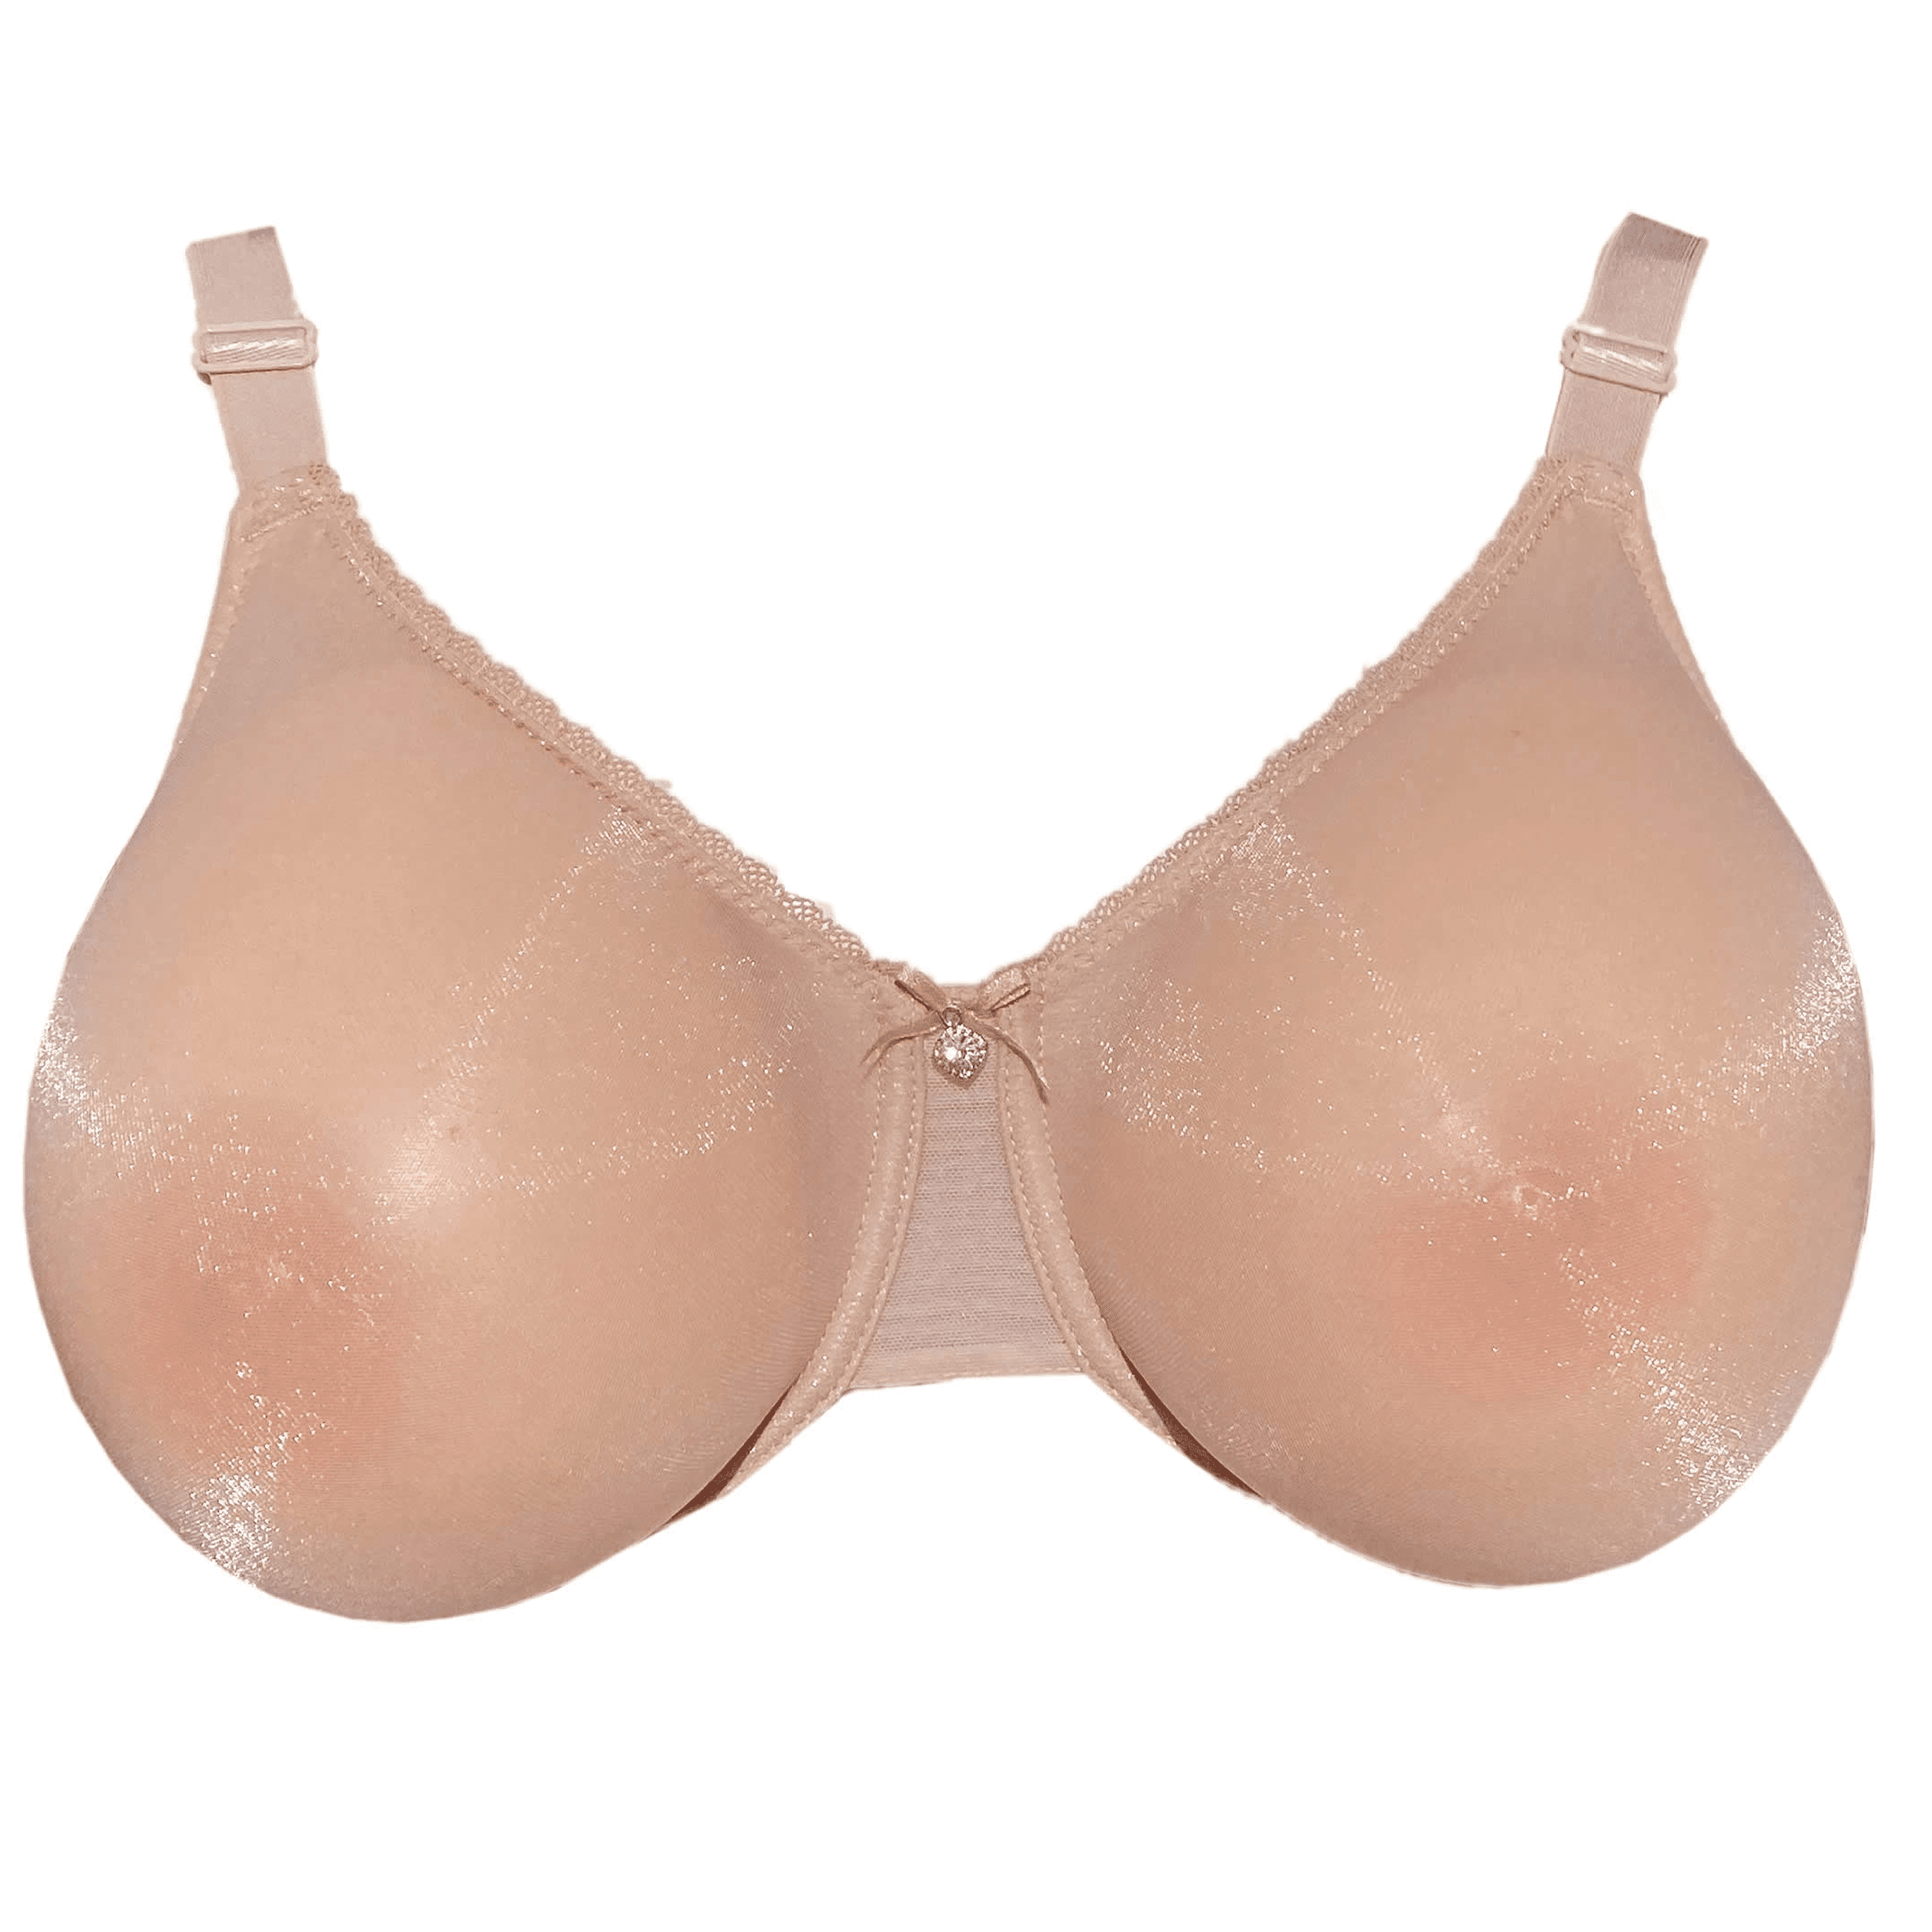 BIMEI See Through Bra CD Mastectomy Lingerie Bra Silicone Breast Forms  Prosthesis Pocket Bra with Steel Ring 9008,Beige,42B